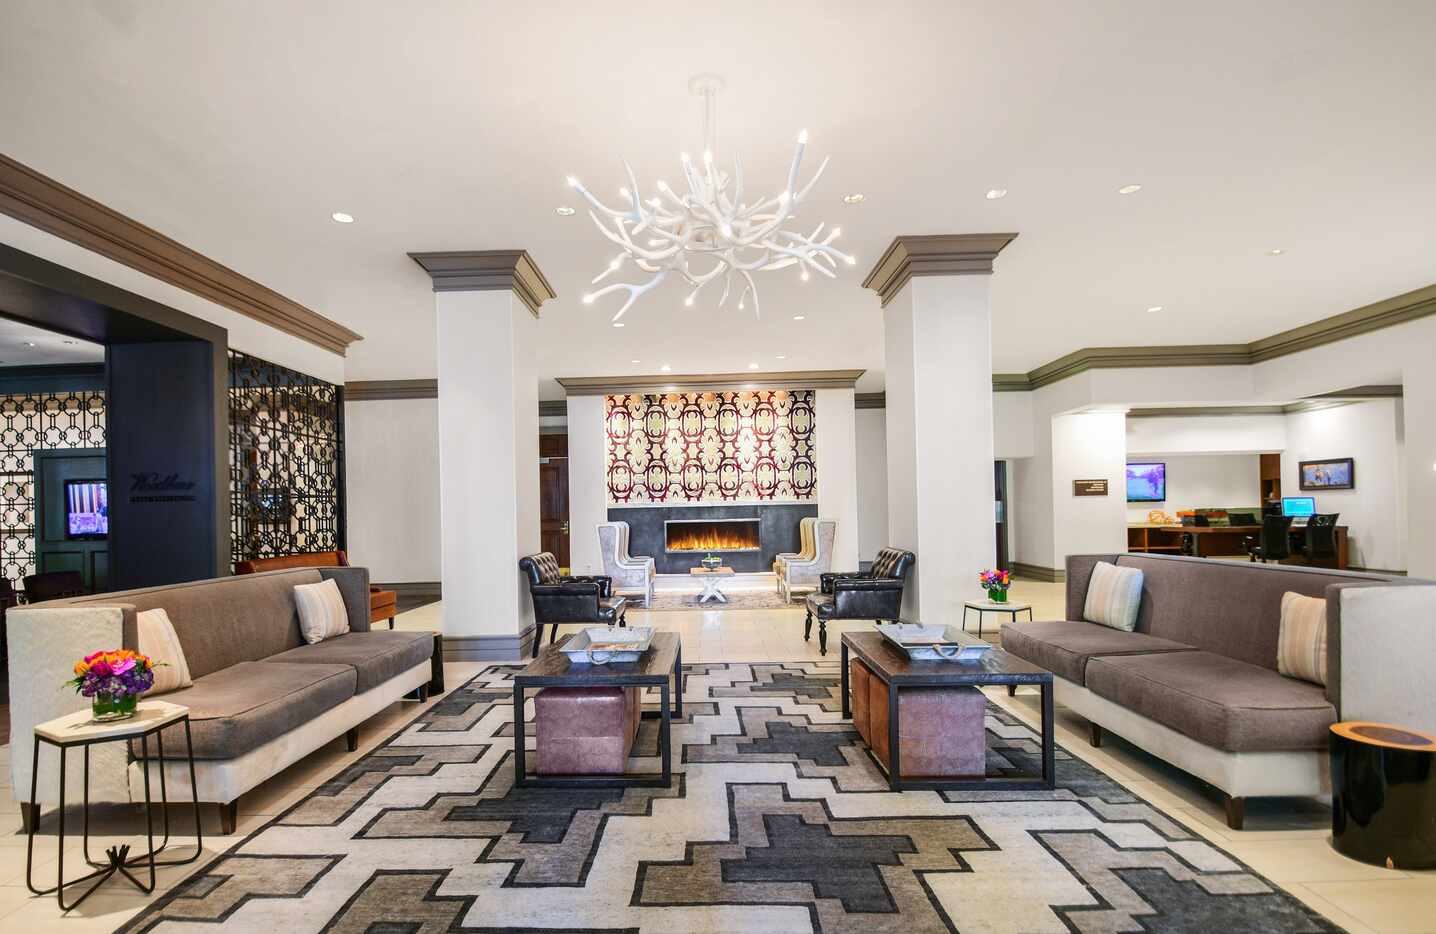 The renovated lobby of the Hilton Dallas/Park Cities hotel.